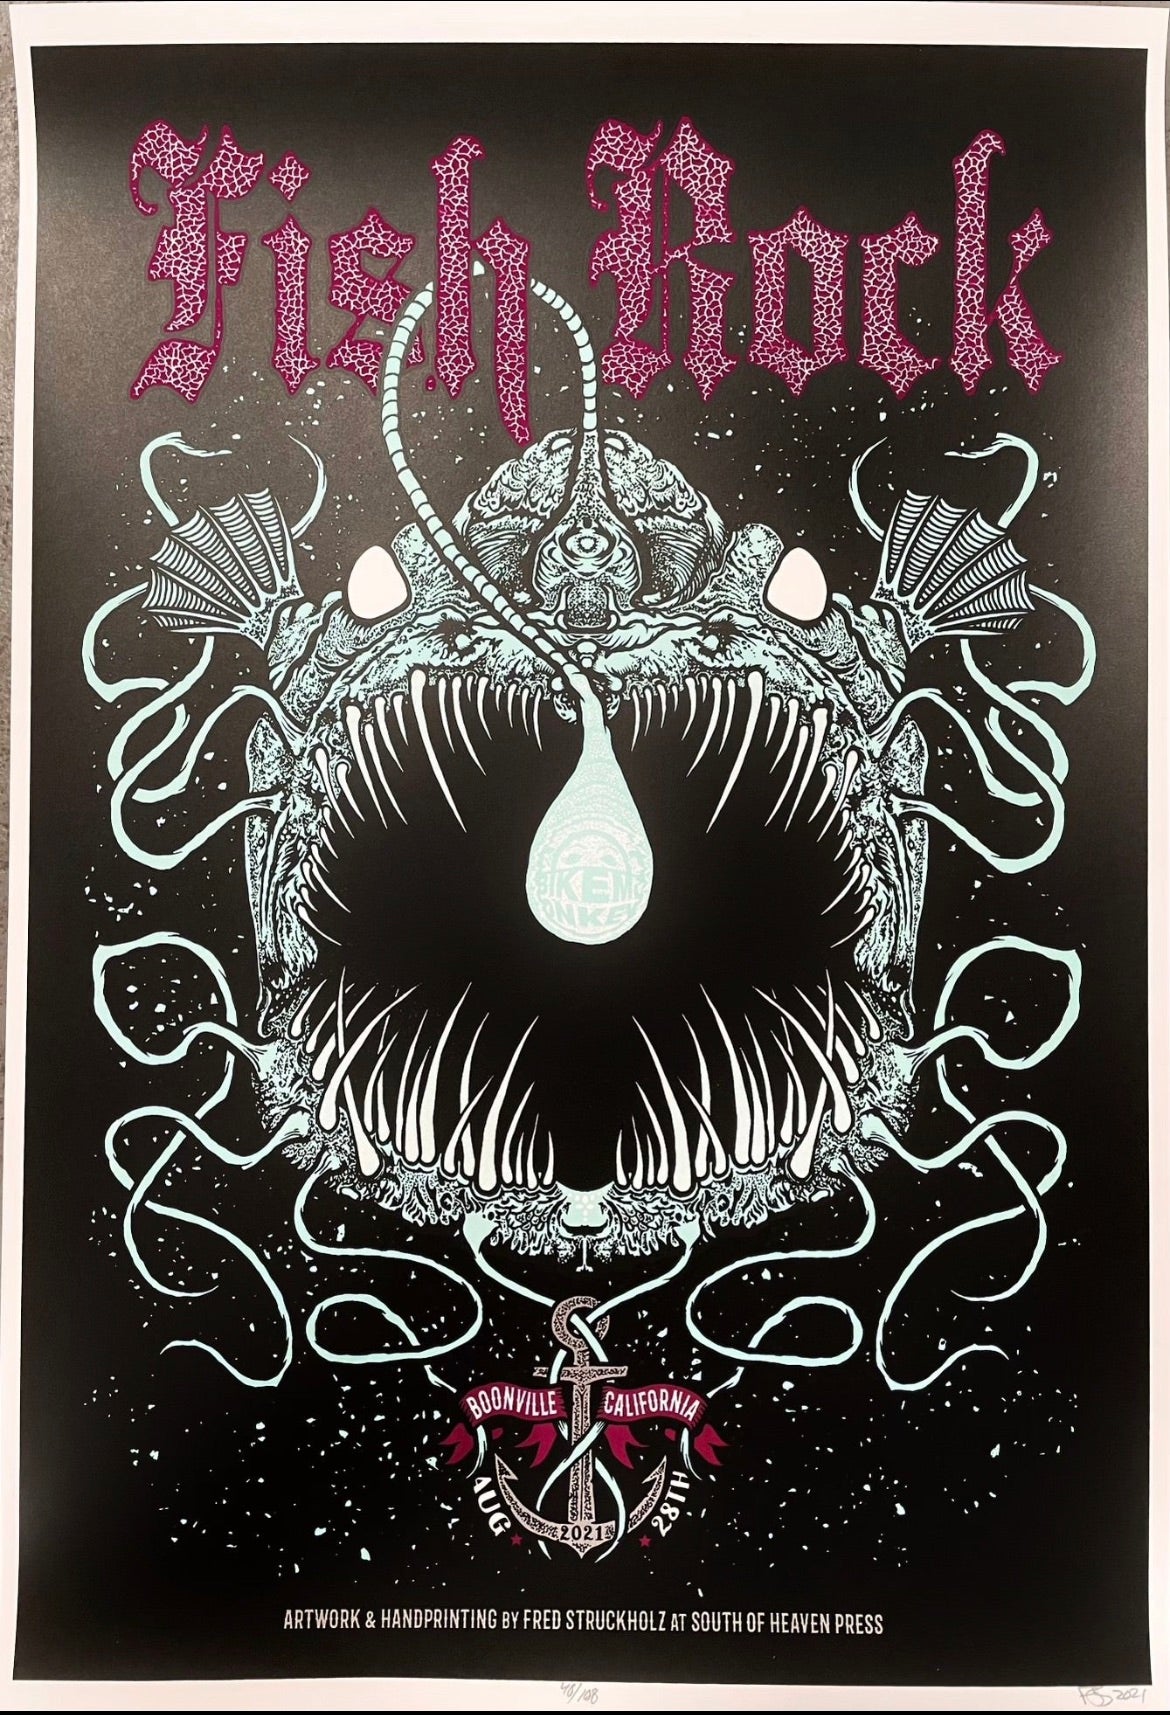 Fish Rock Returns! Limited Edition Commemorative Poster